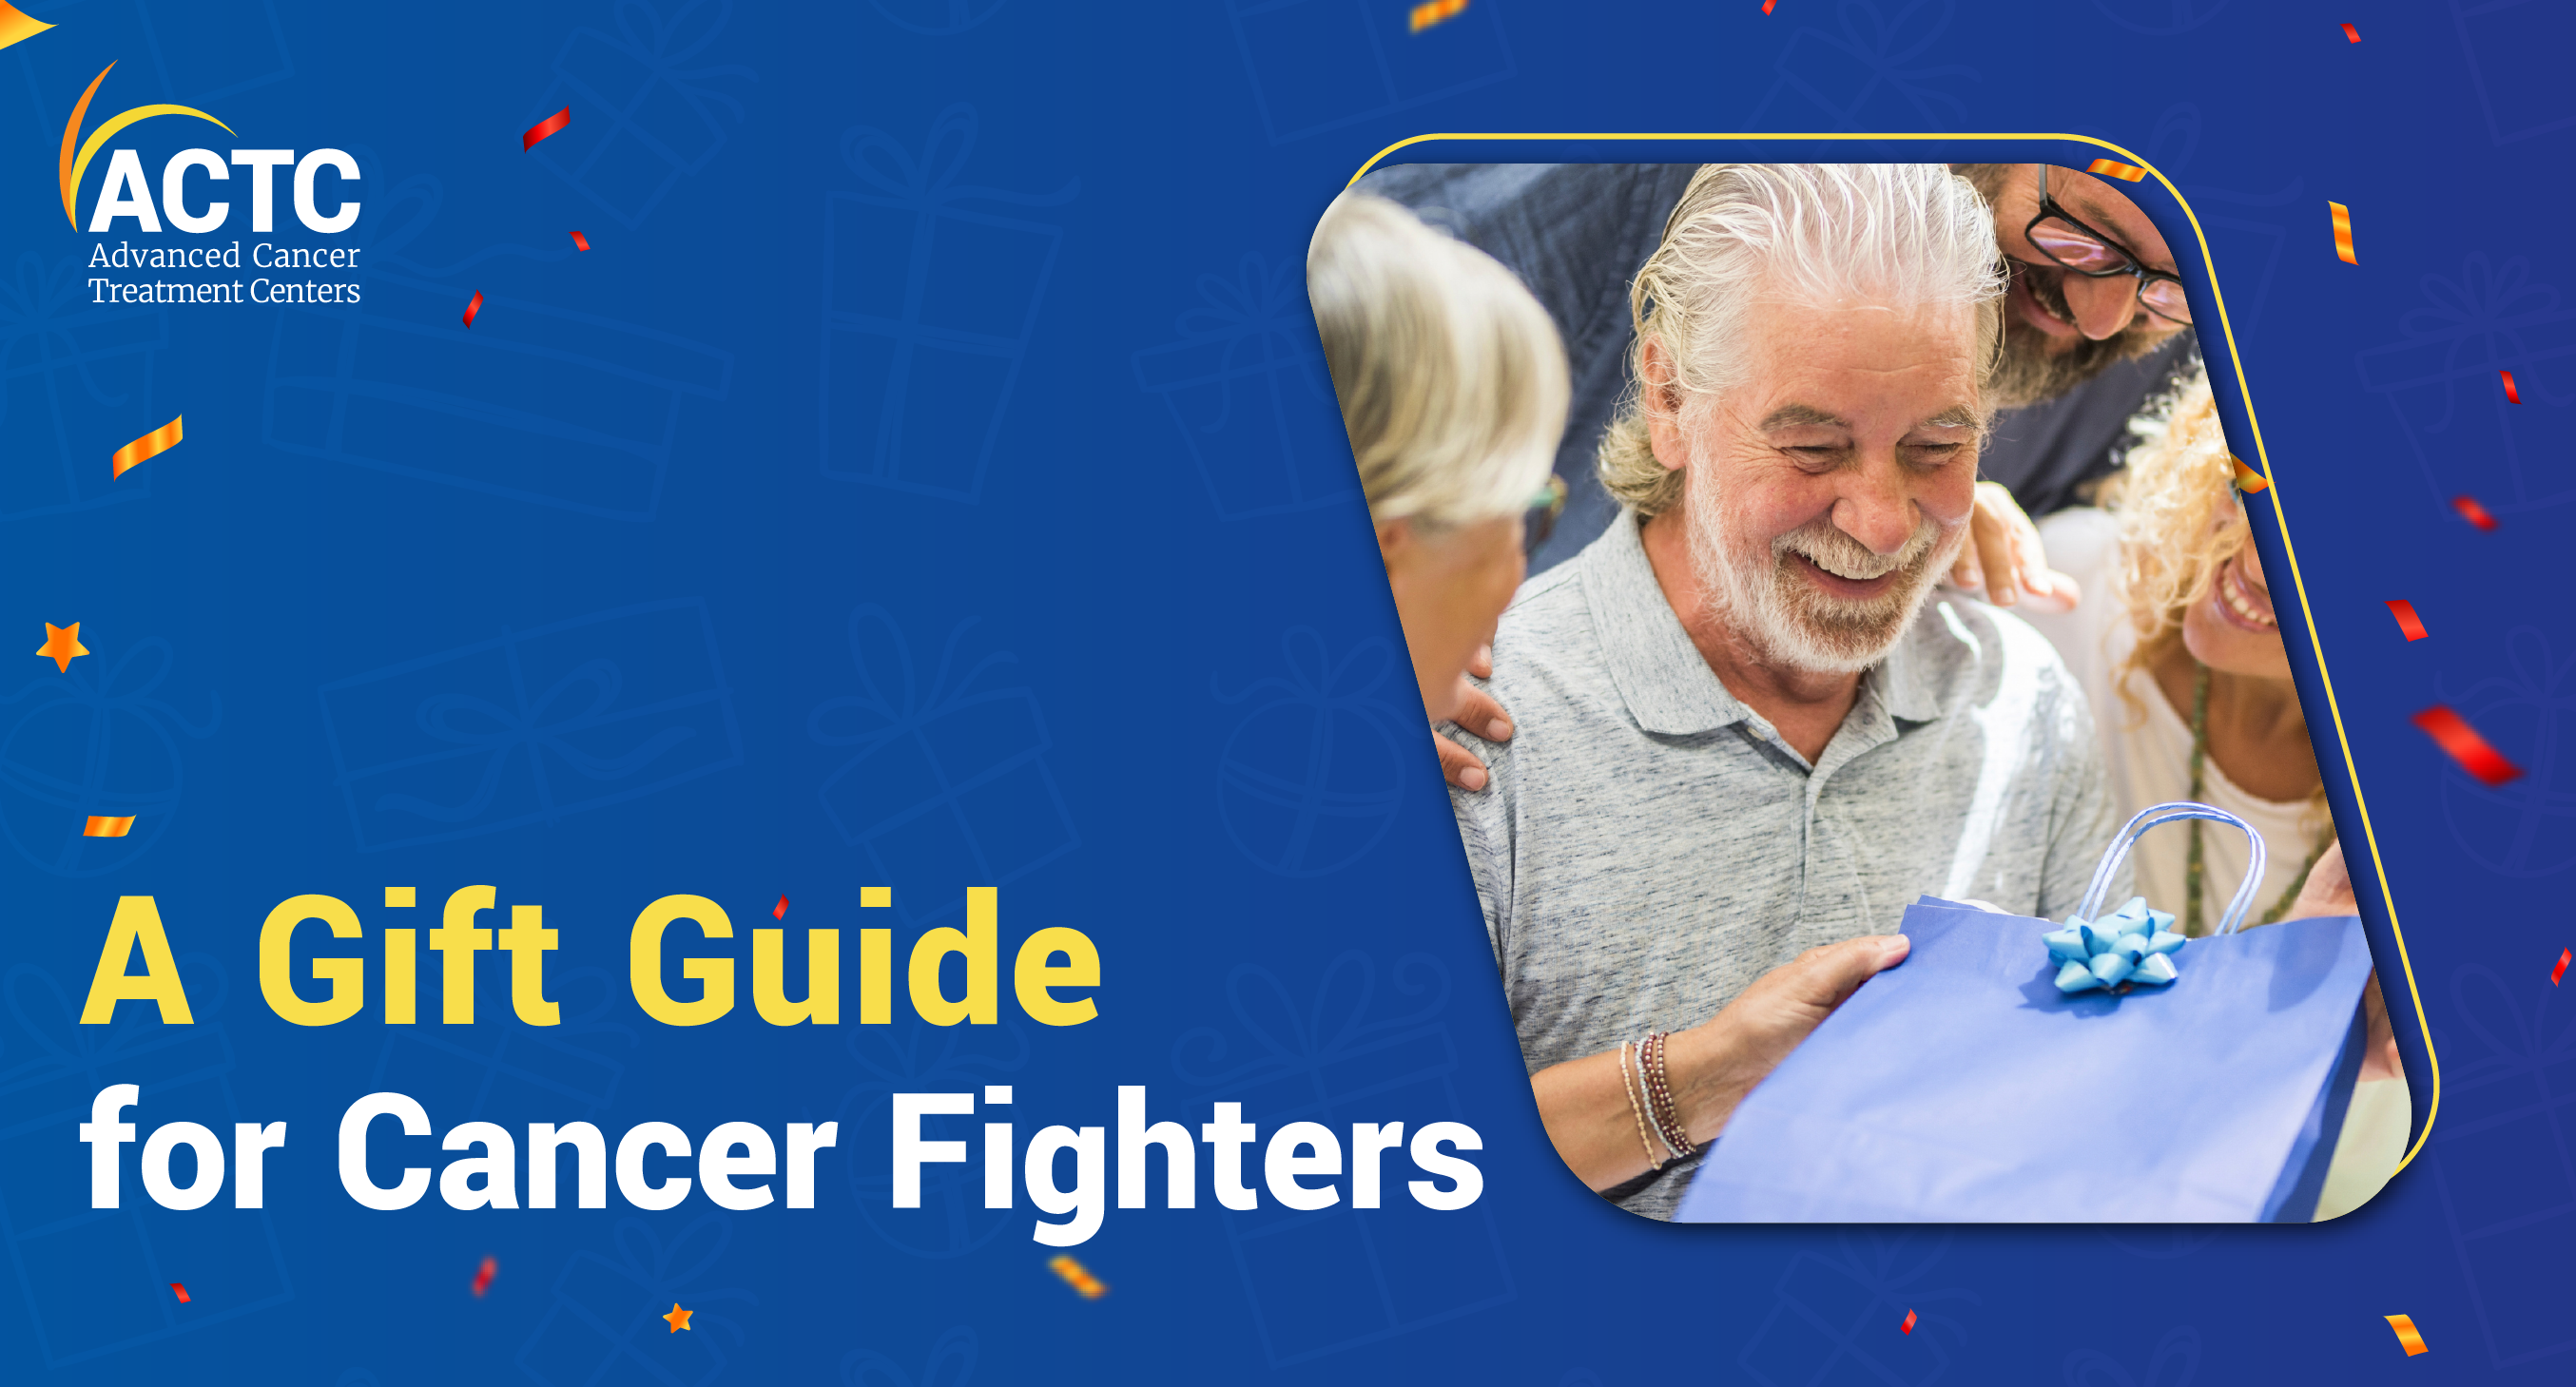  A gifting guide for cancer fighters